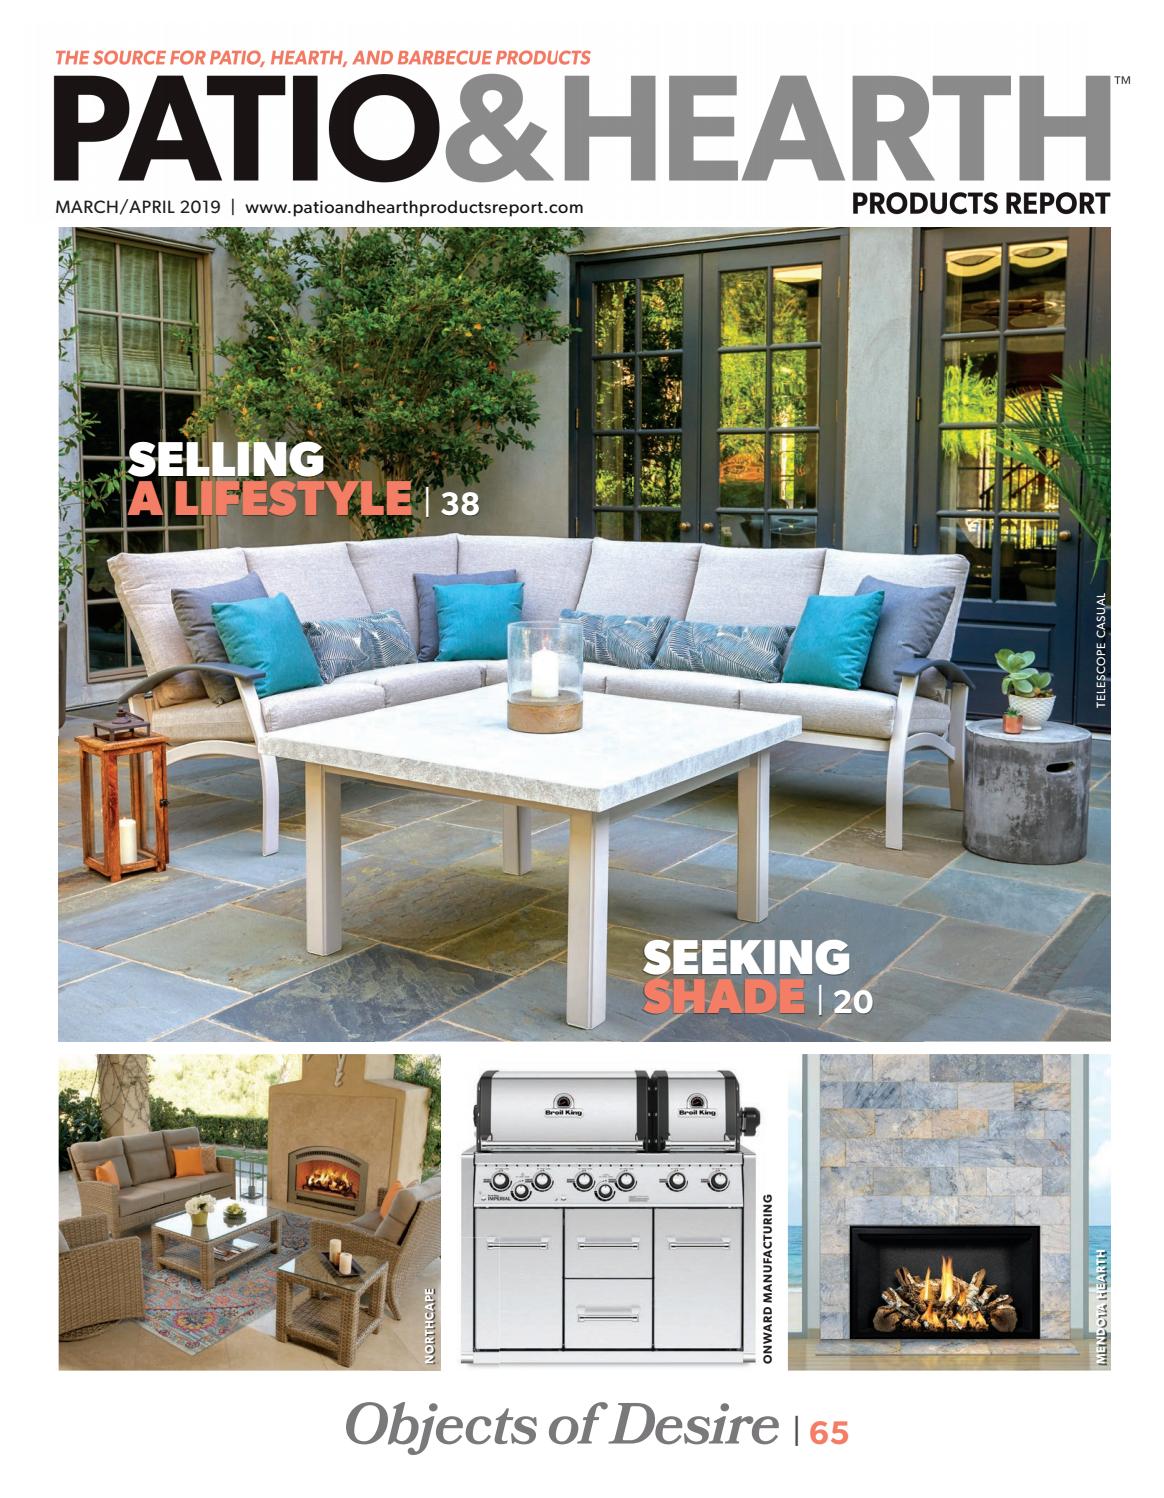 Fireplace and Chimney Authority Fresh Patio & Hearth Products Report March April 2019 by Peninsula